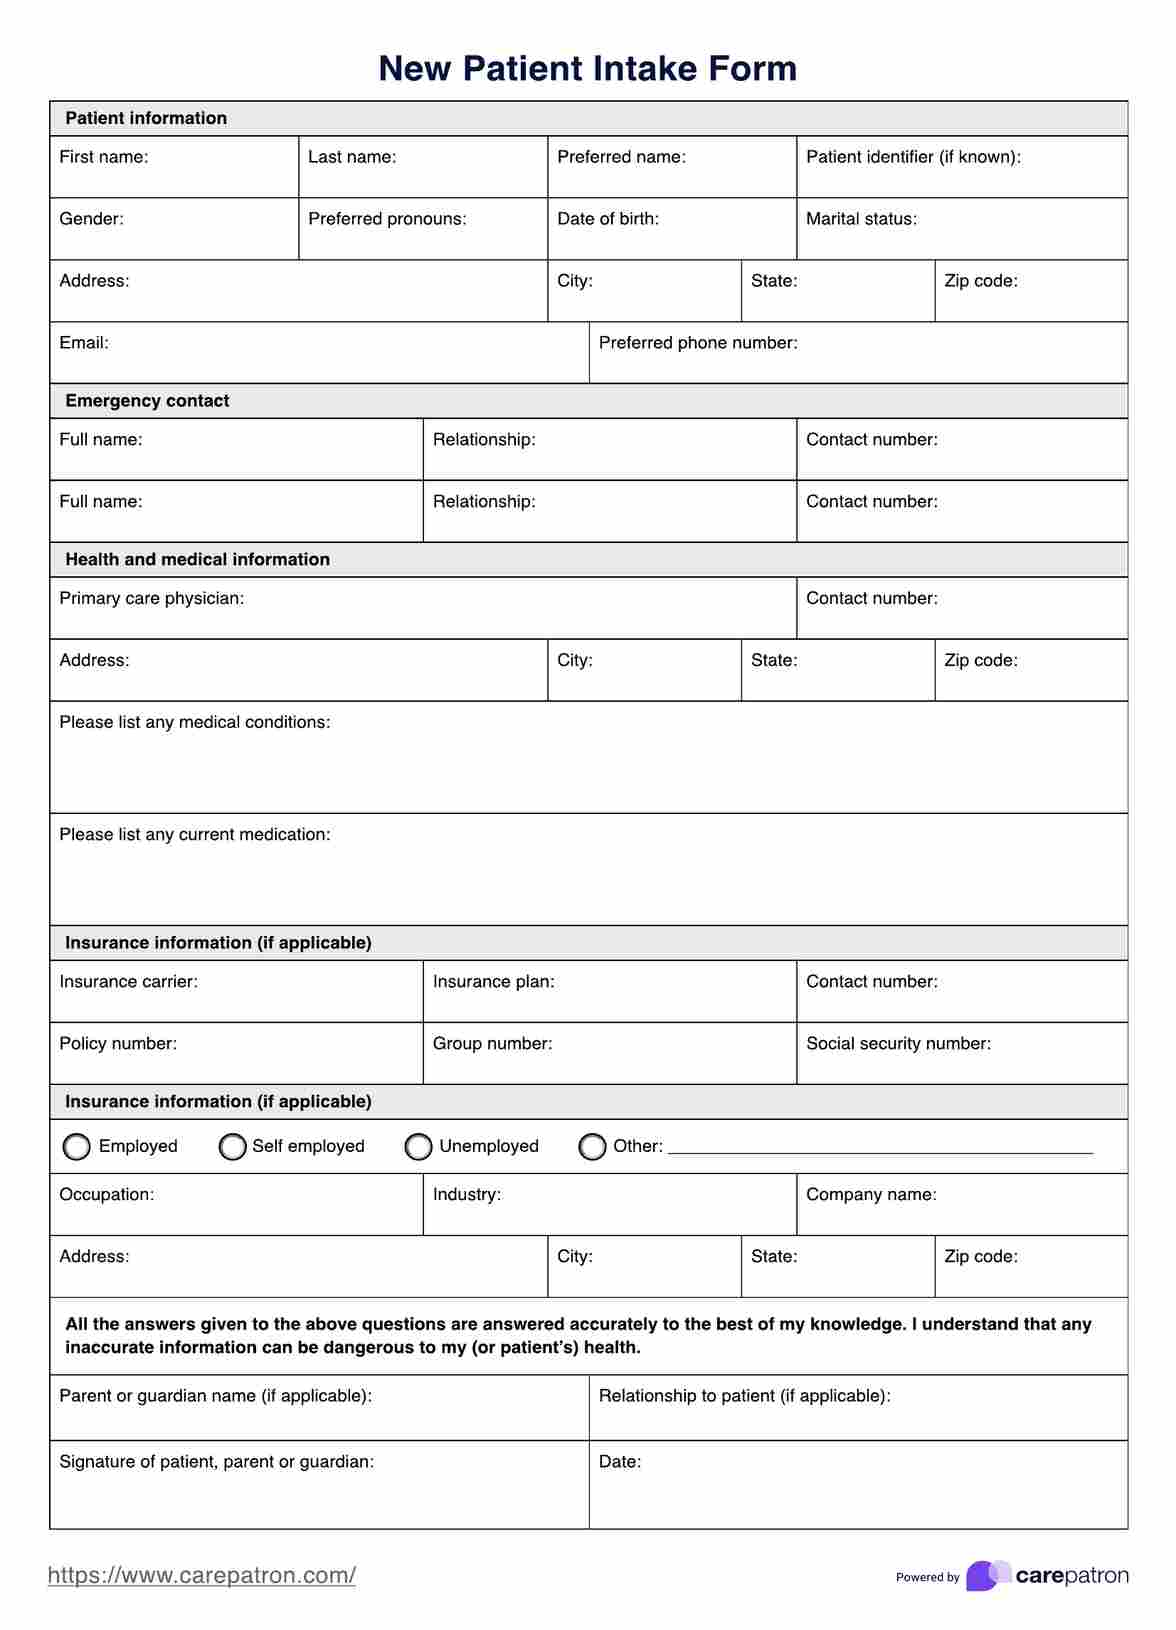 New Patient Intake Form PDF Example